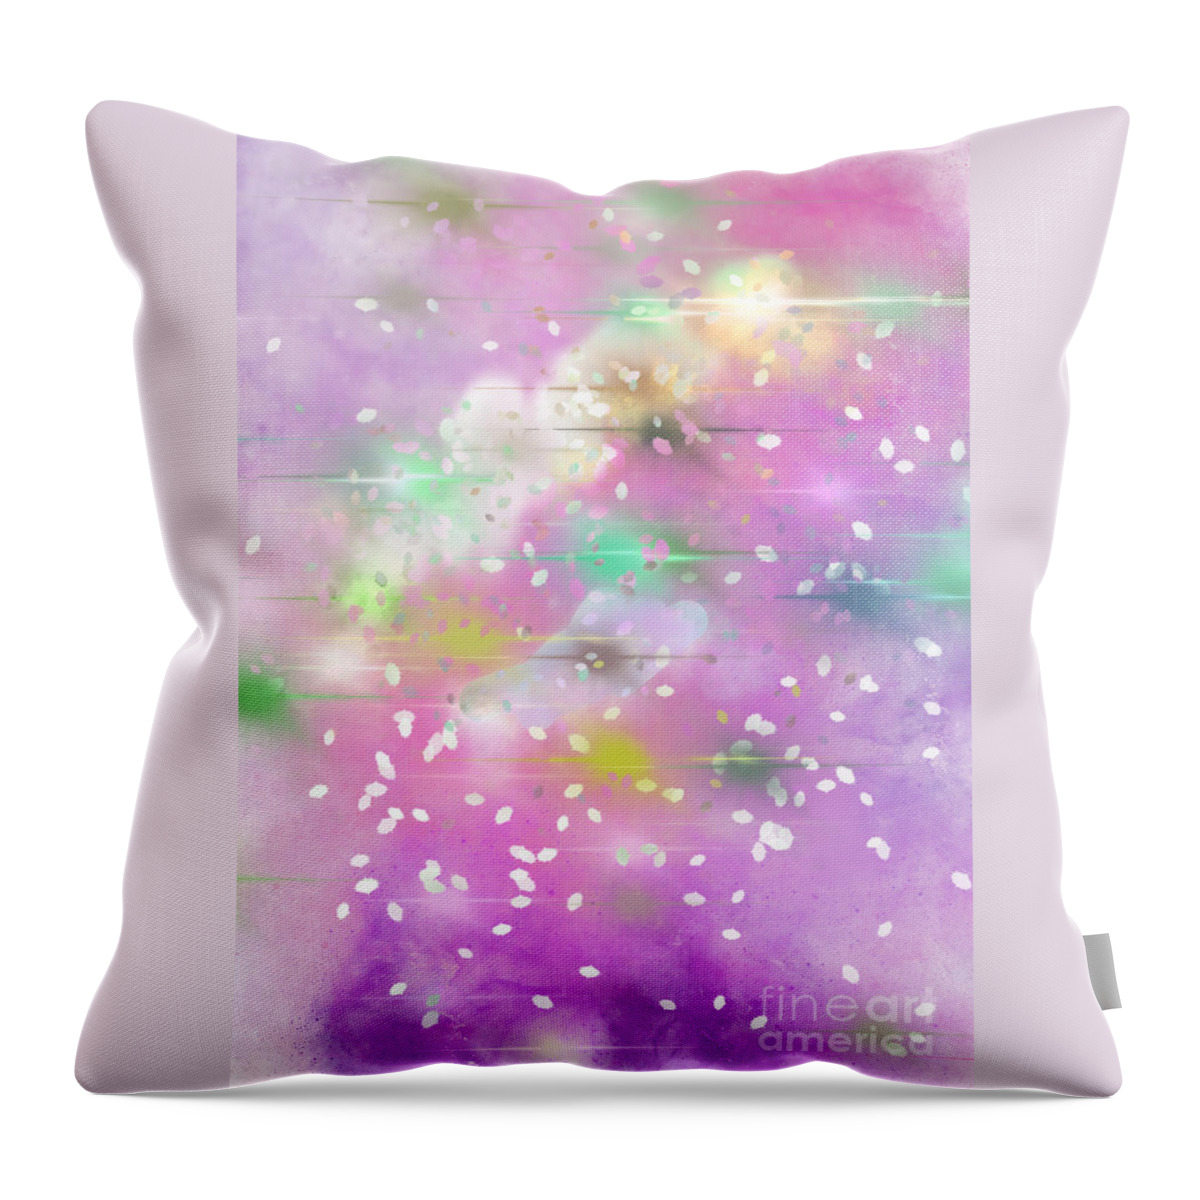 Pink Sky Throw Pillow featuring the digital art Snowy Pink Sky #1 by Zotshee Zotshee